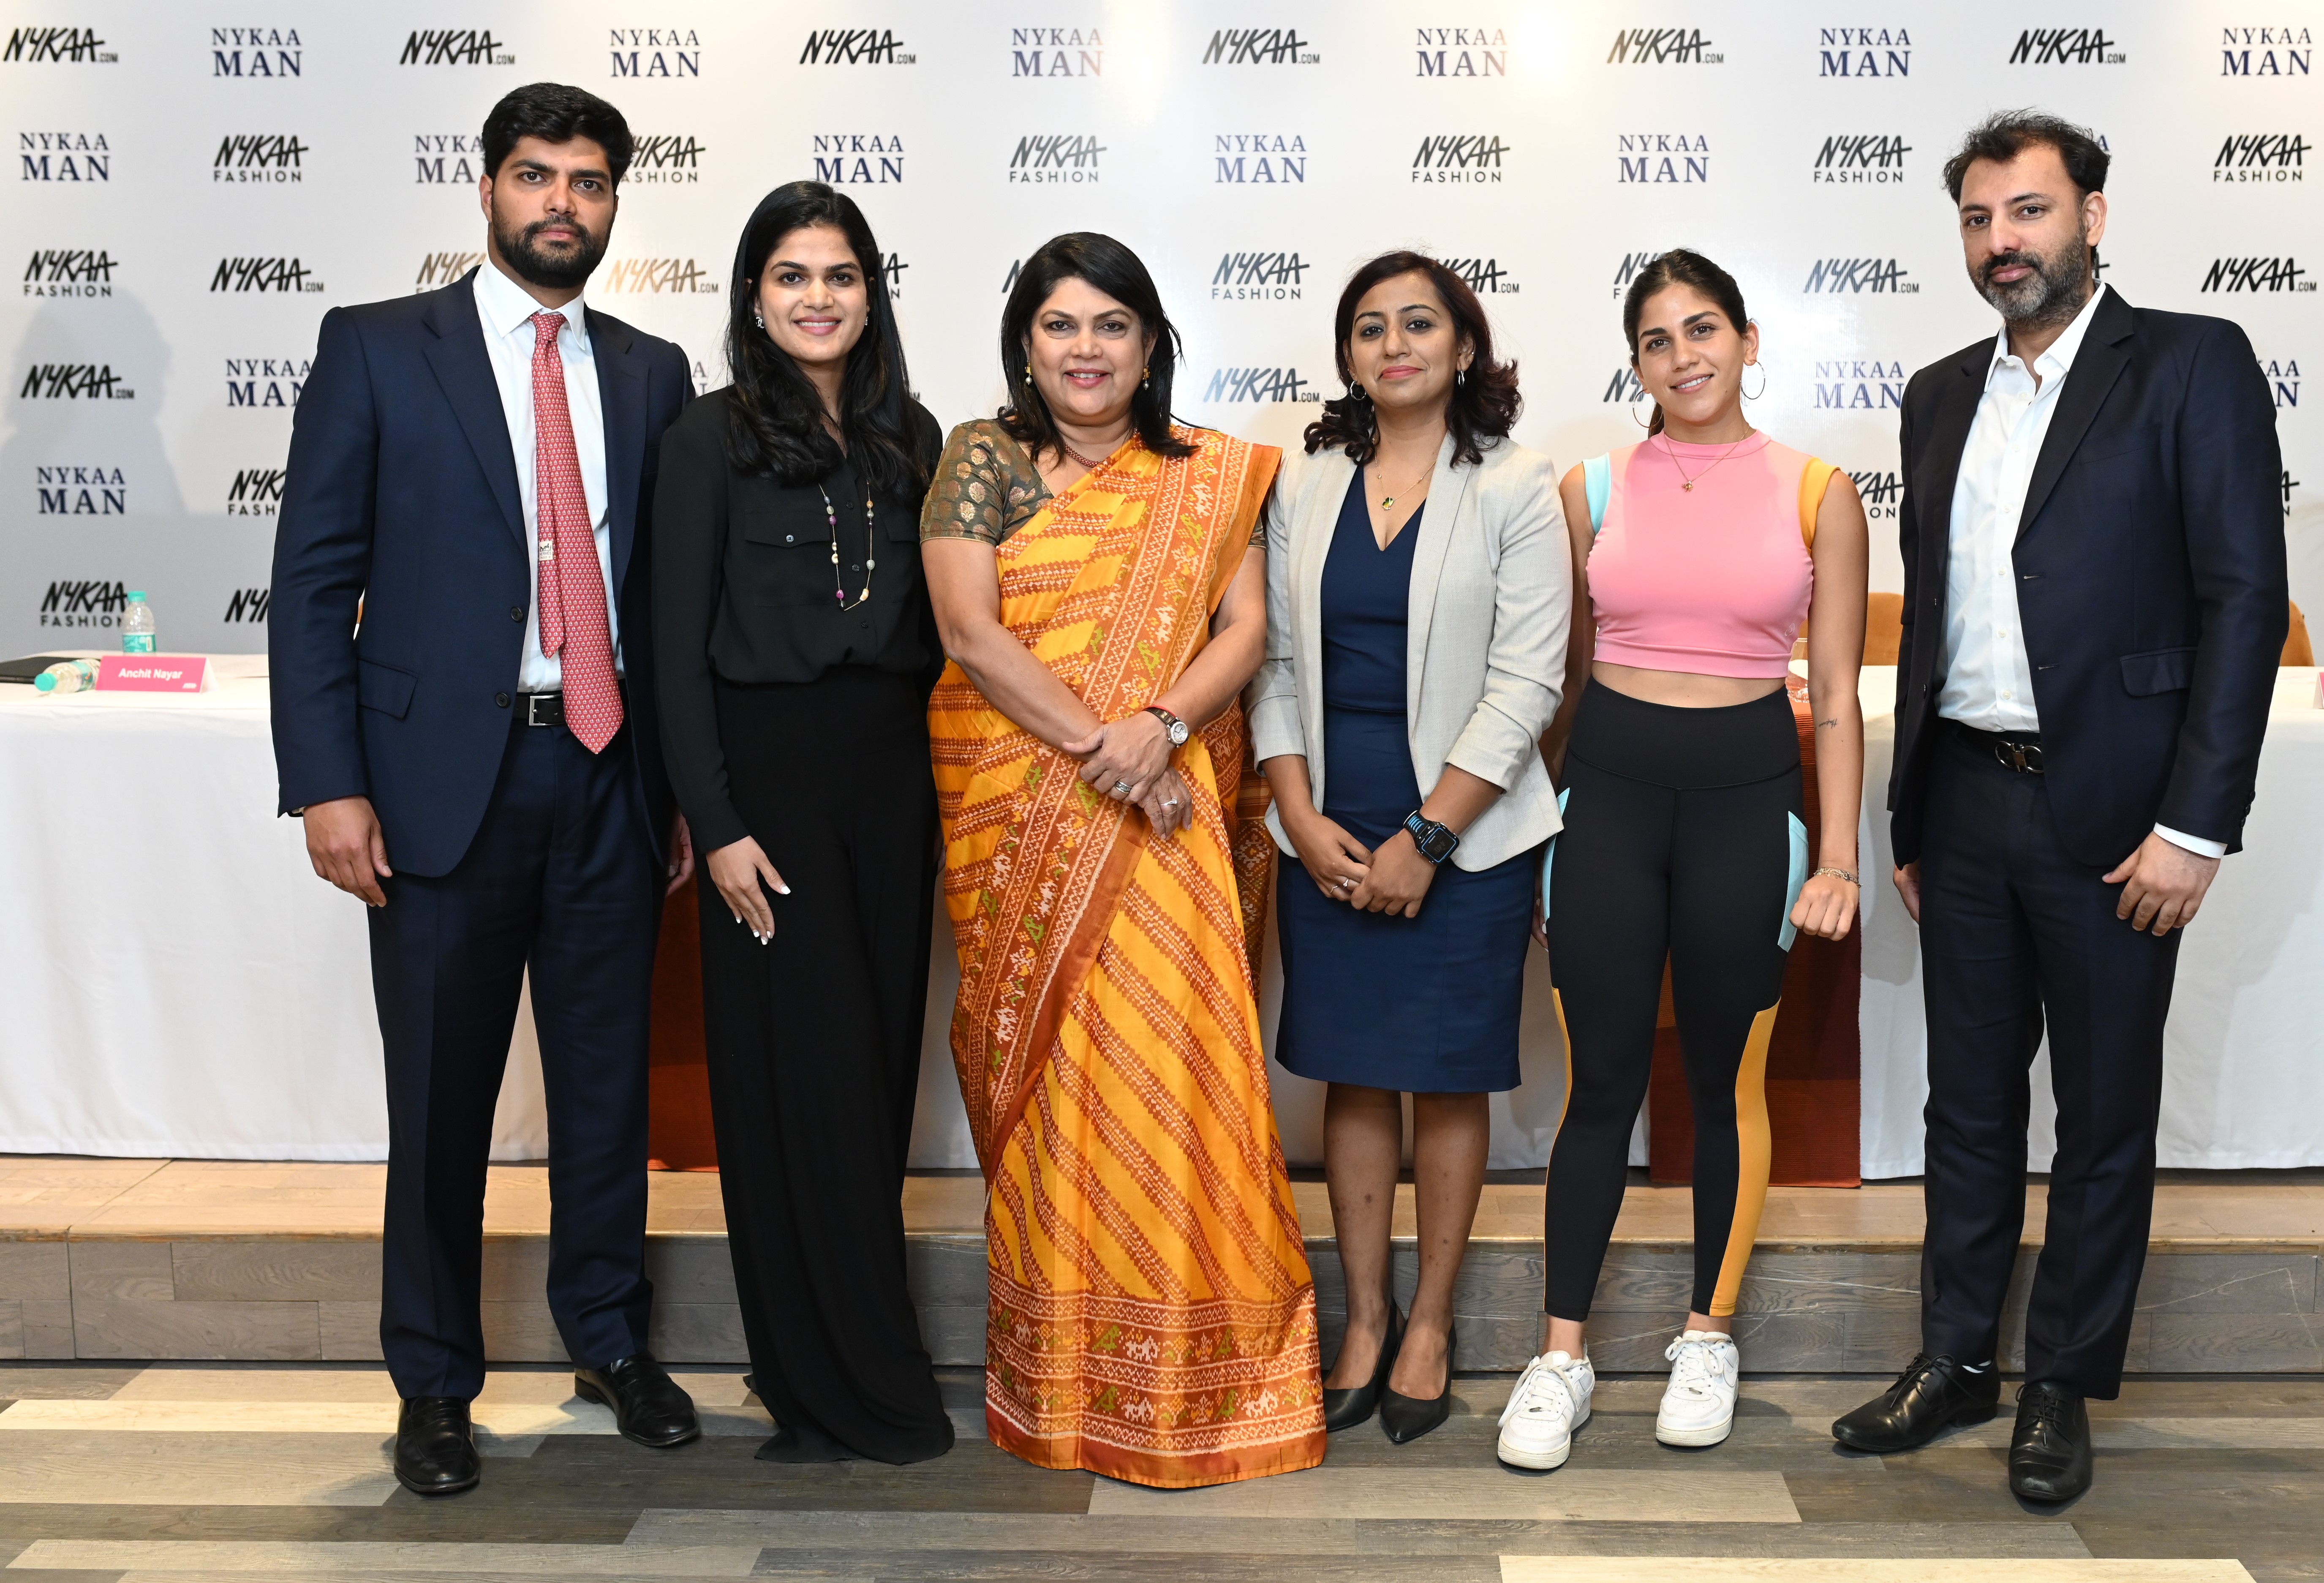 Nykaa Fashion expands its activewear portfolio by acquiring Kica decoding=